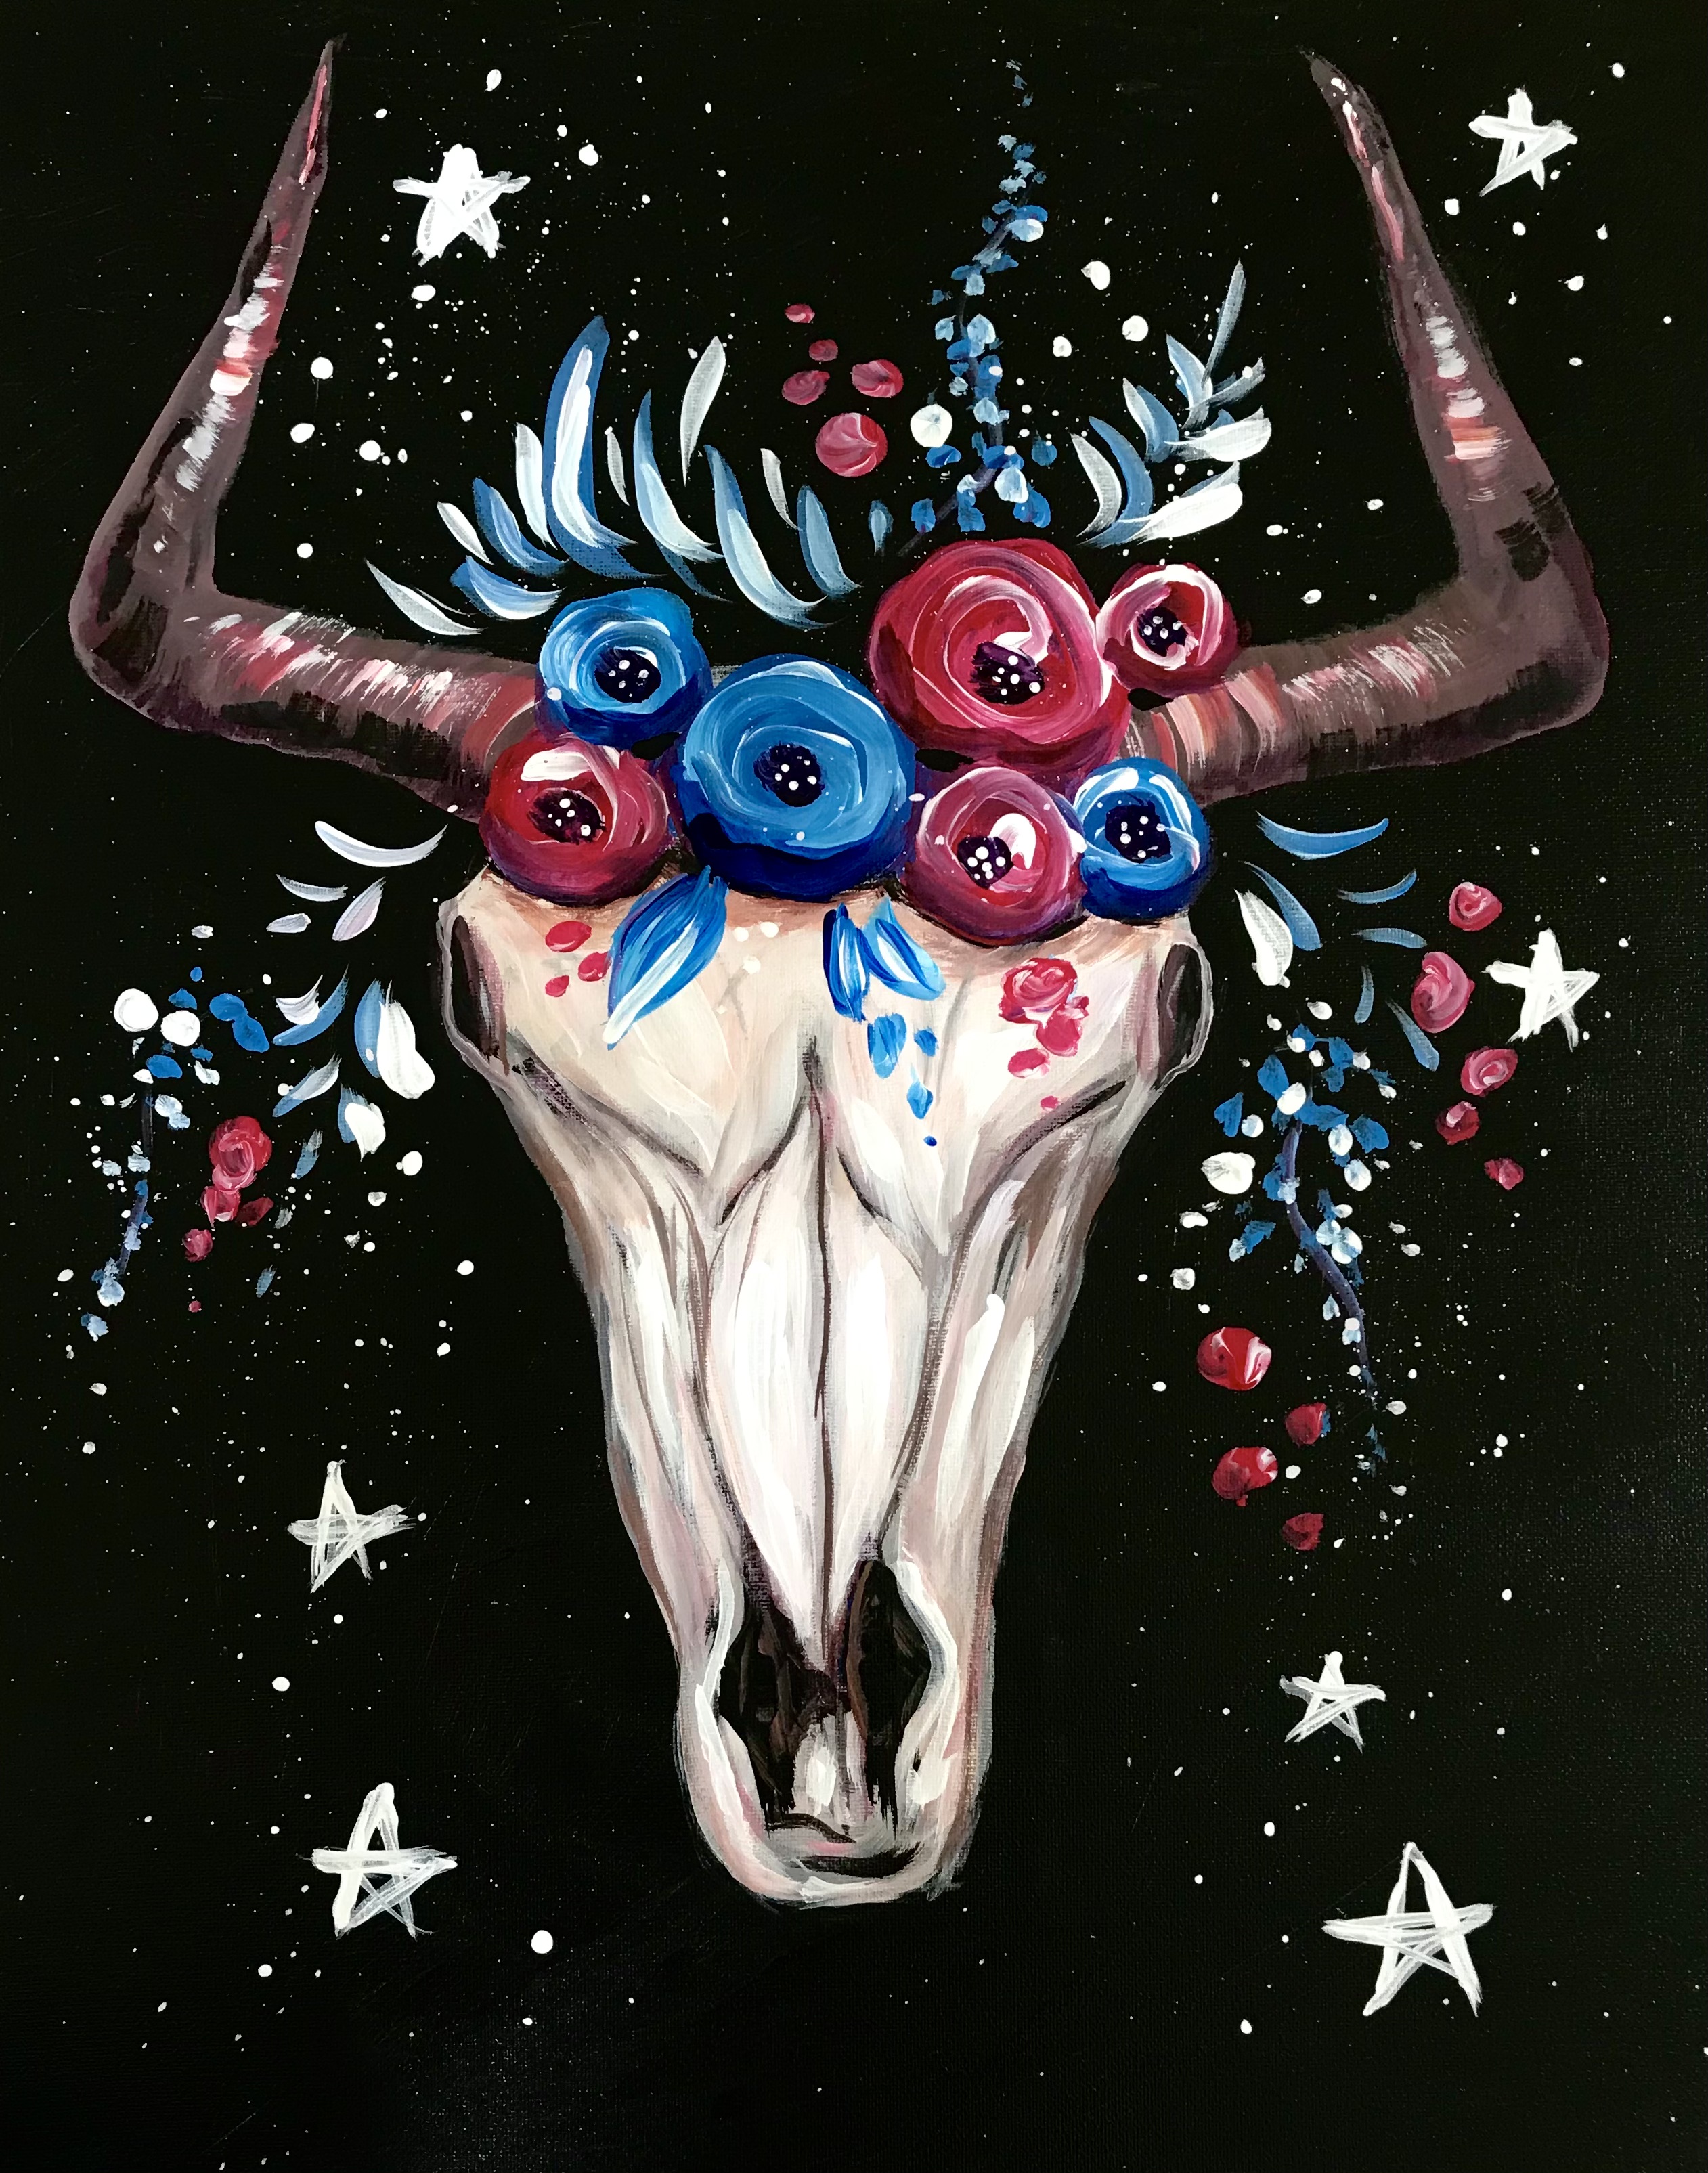 A American Bull Skull experience project by Yaymaker